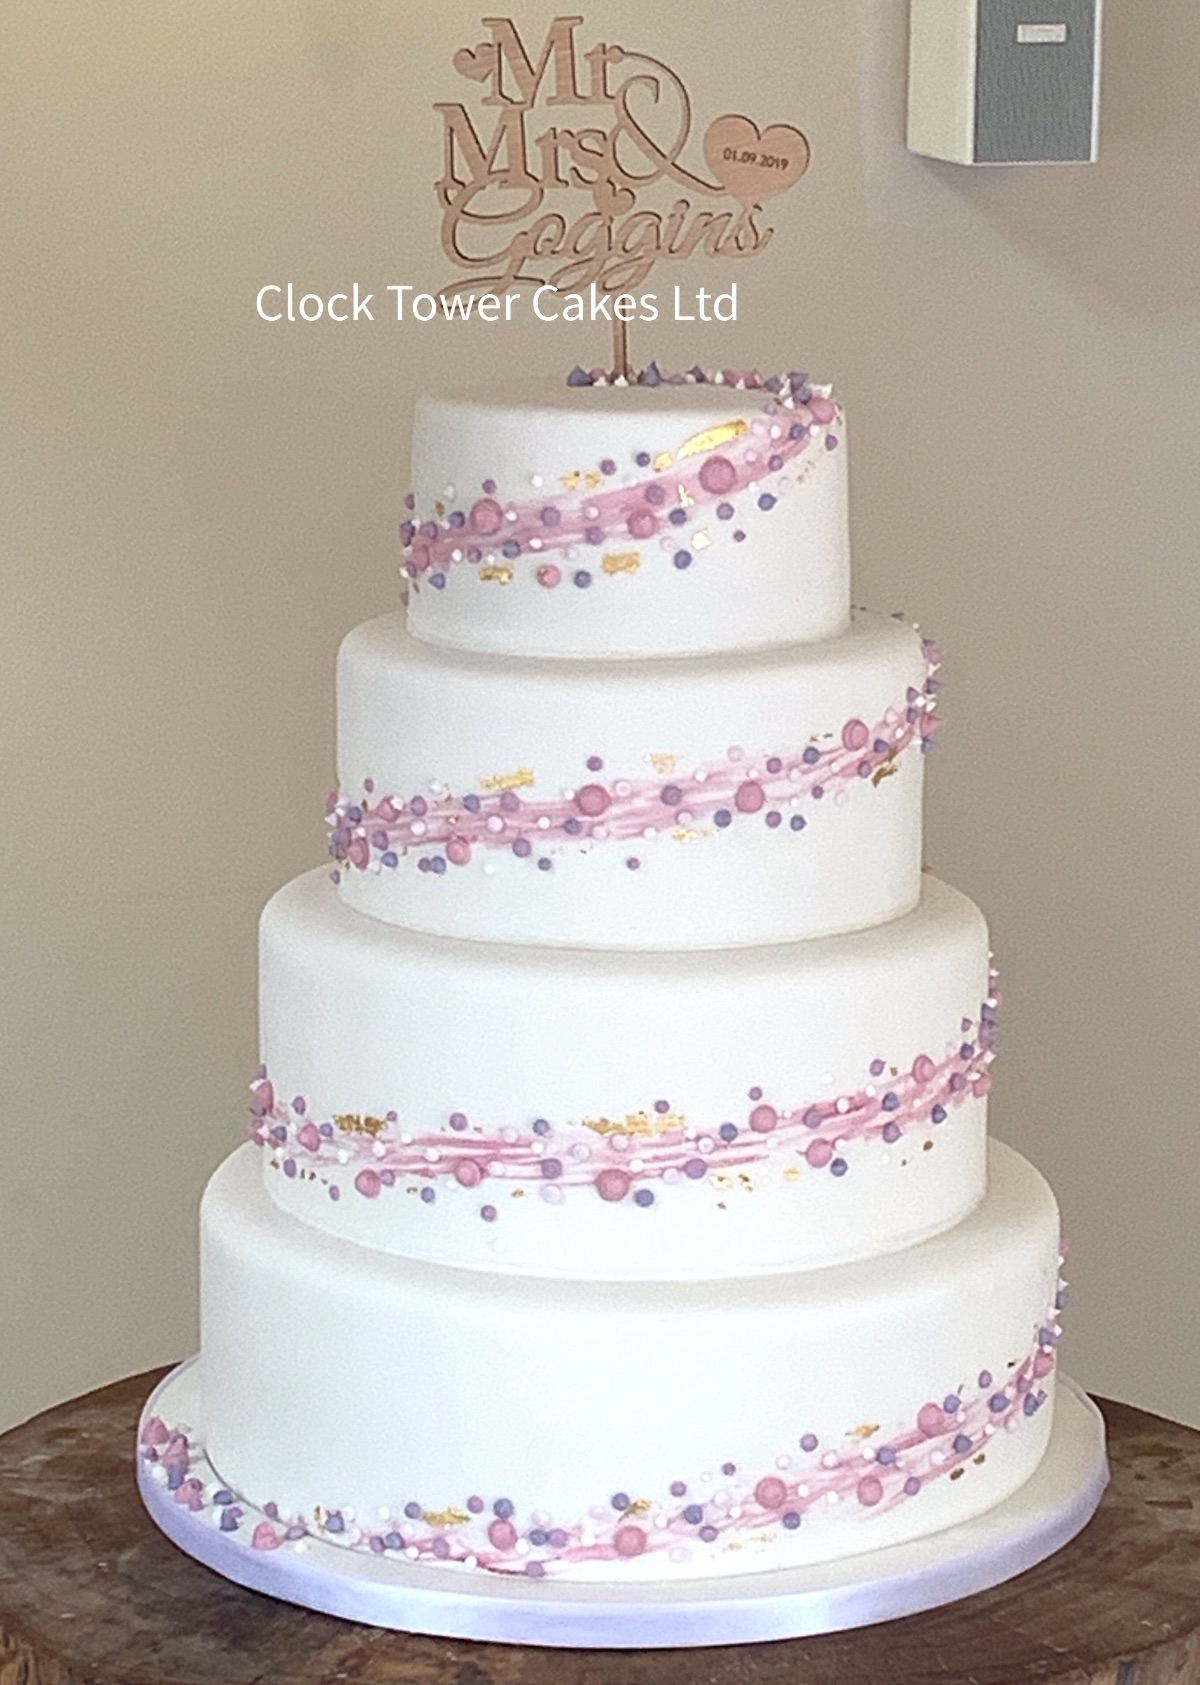 Clock Tower Cakes-Image-11